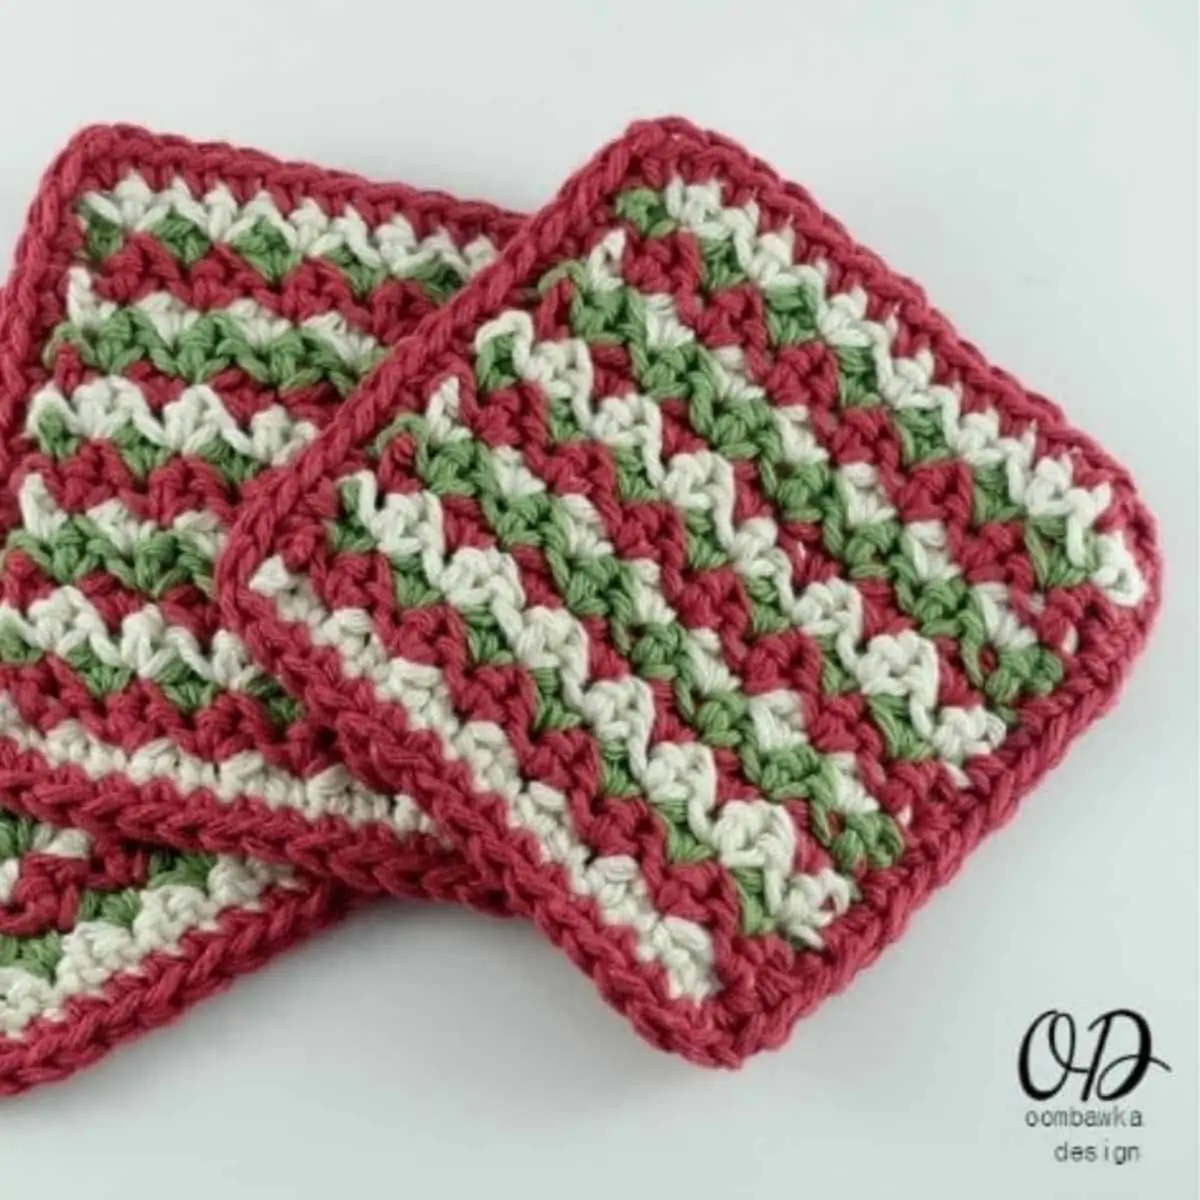 striped green, white, and red coasters crocheted